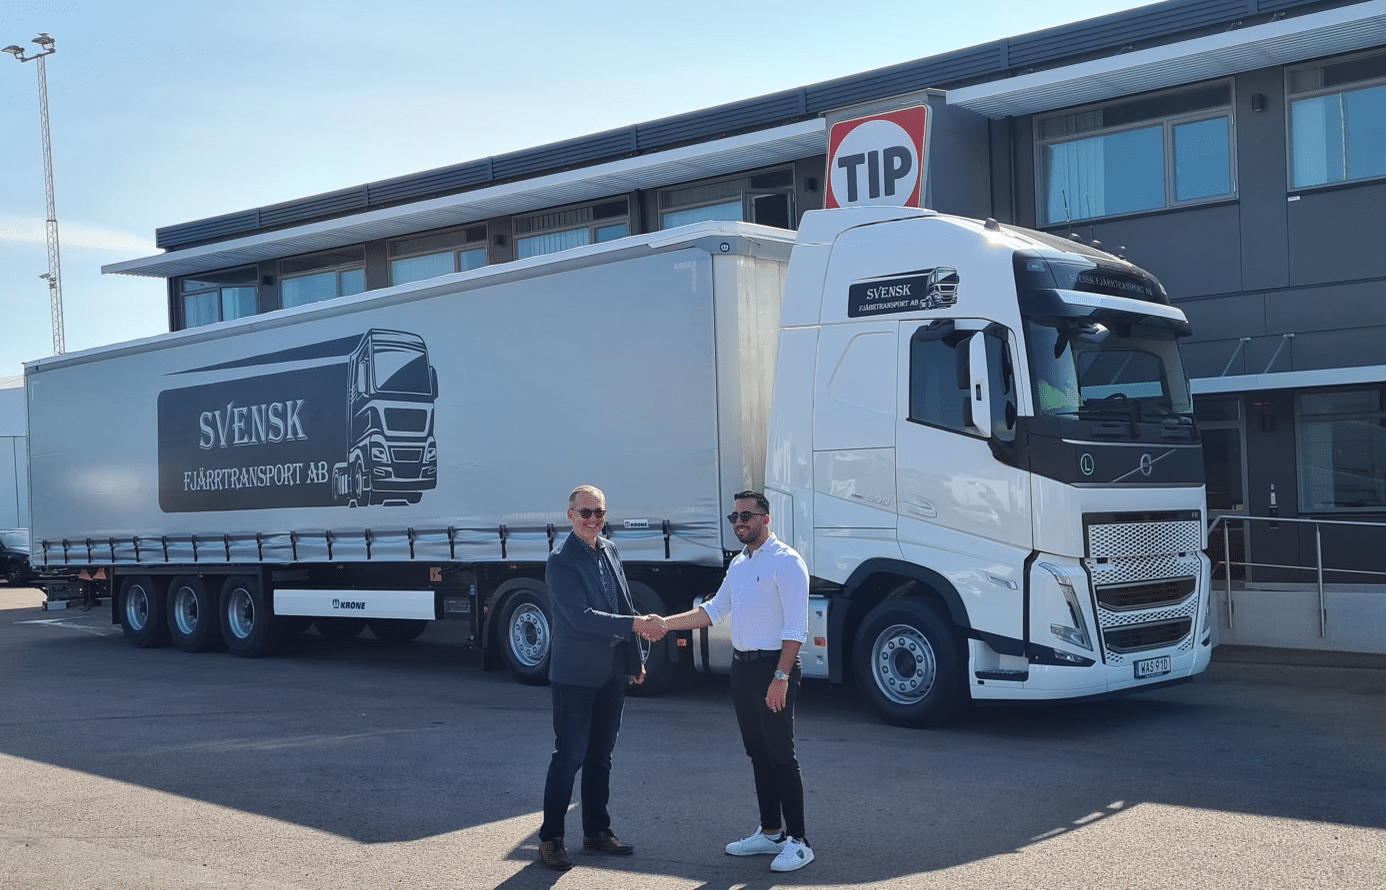 CEO of SFT AB Shakes hand with Member of TIP Group